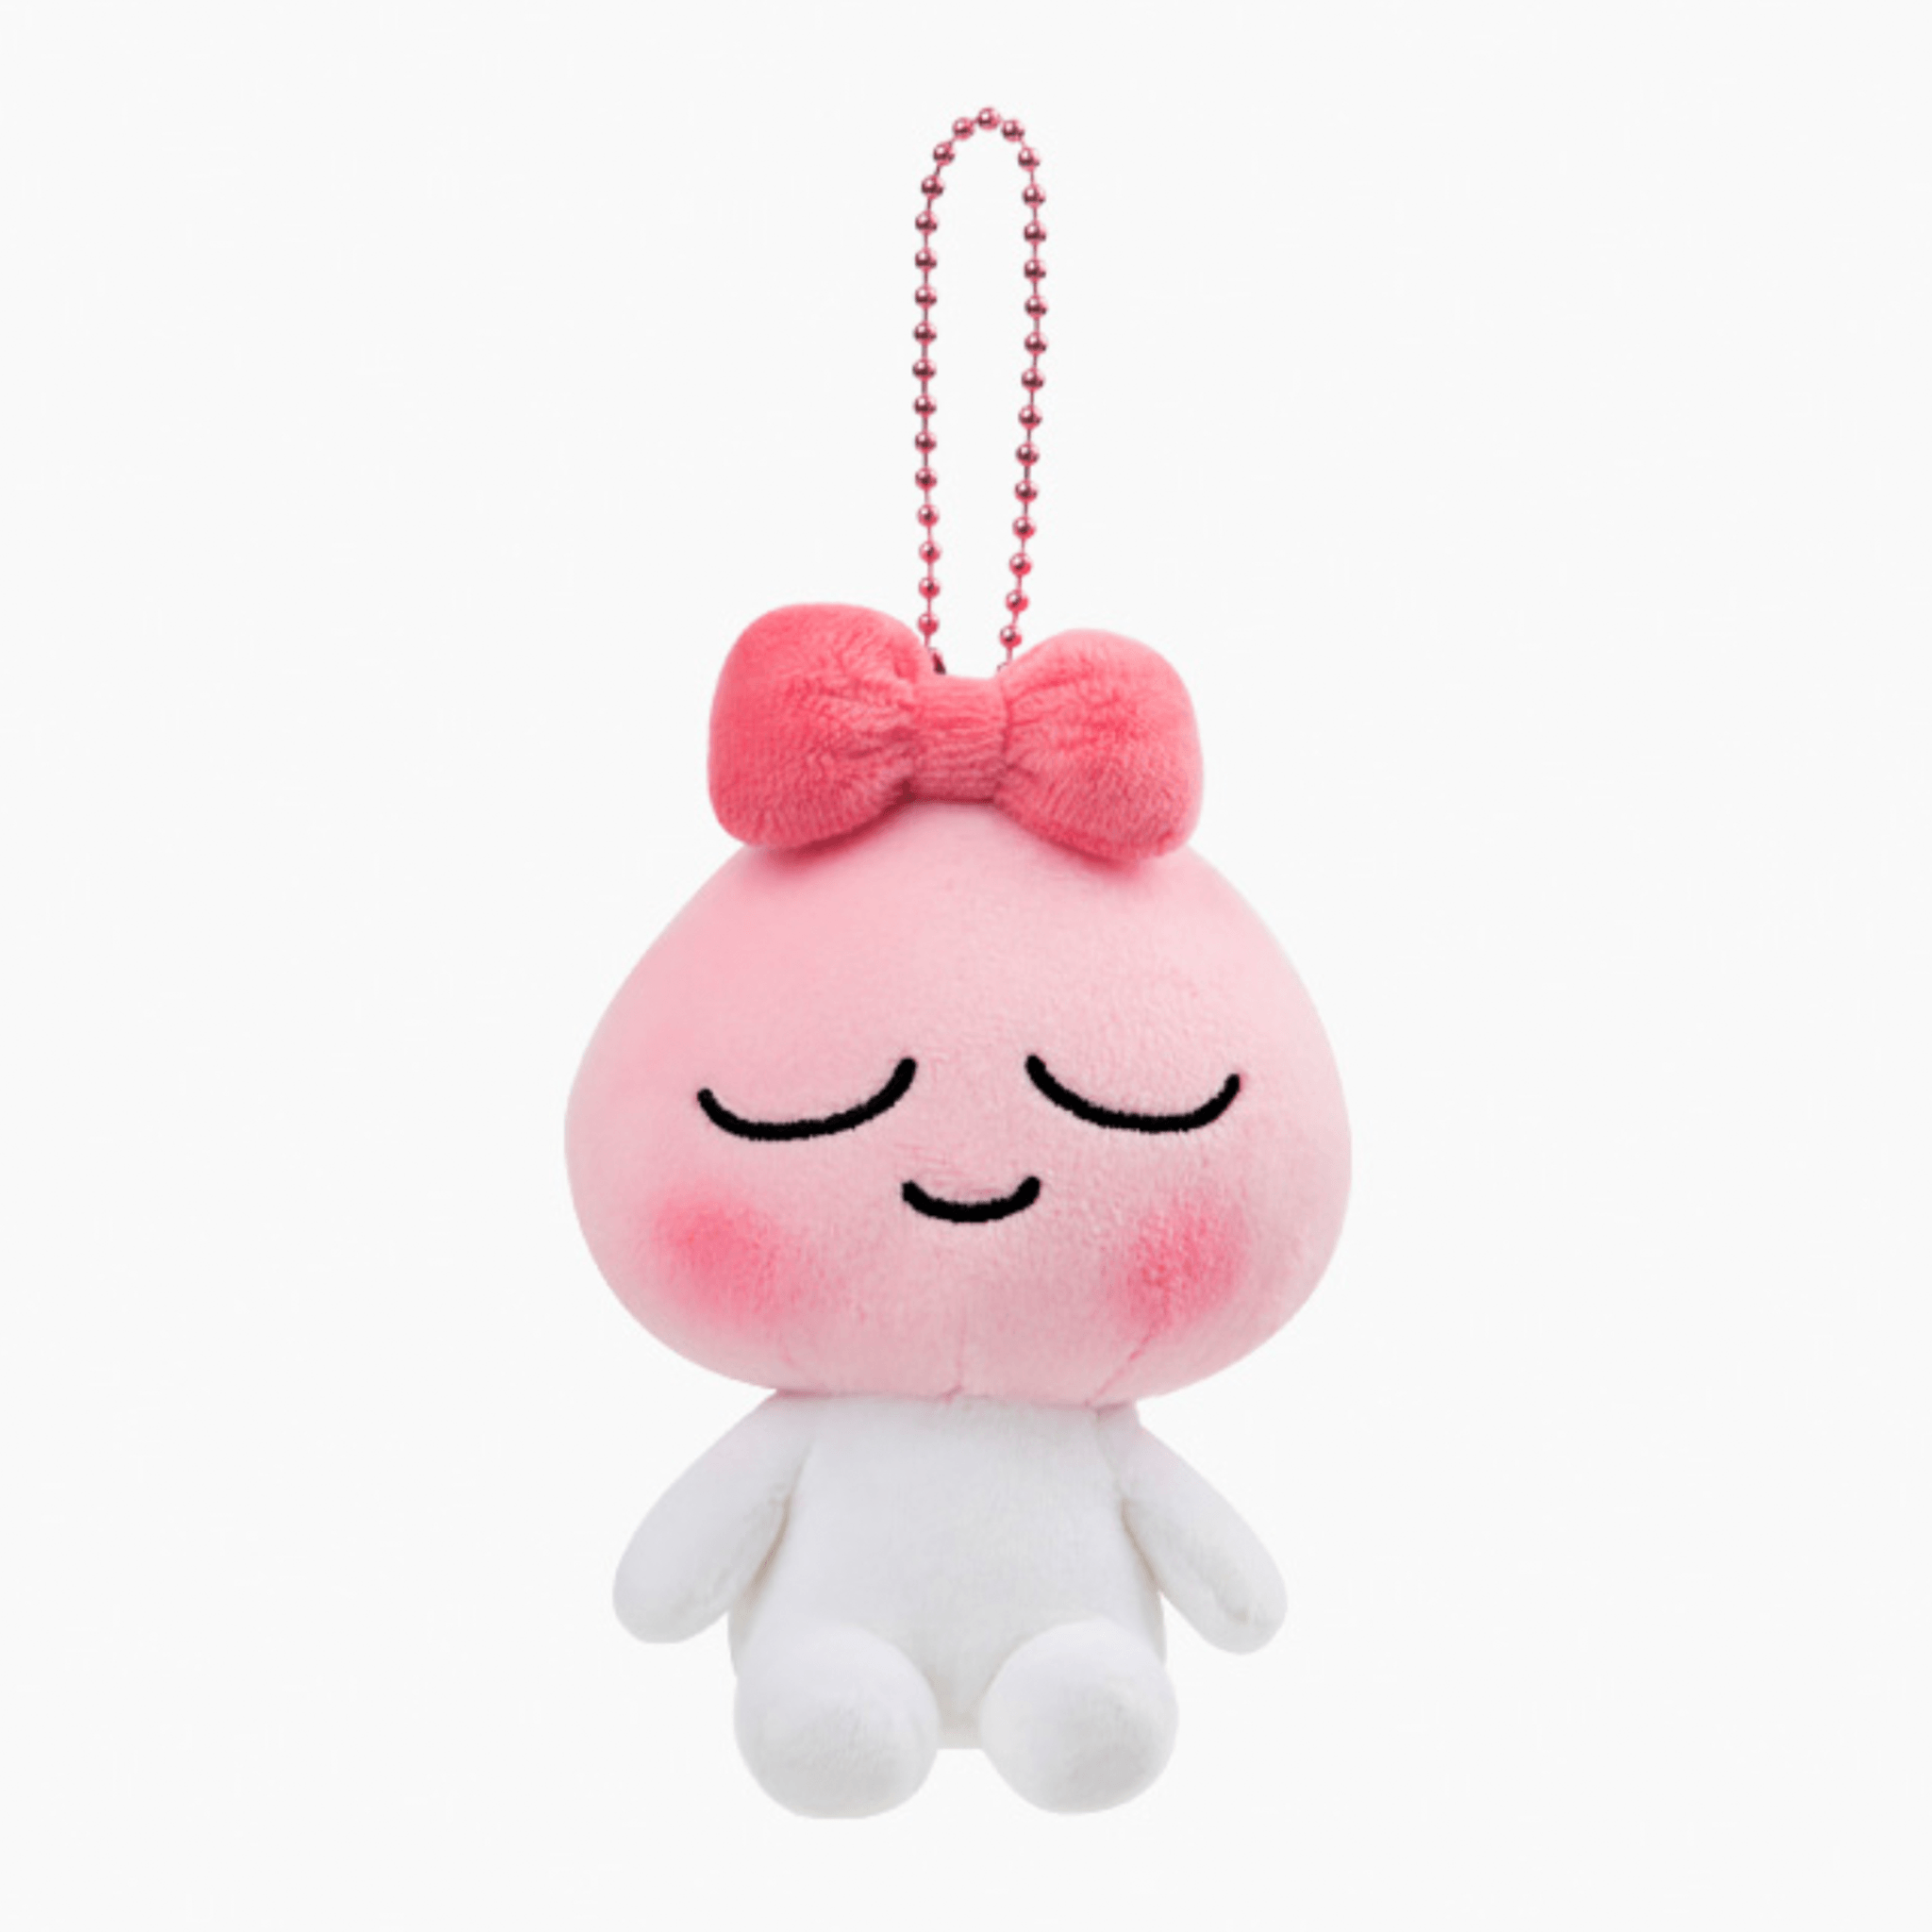 Princess Leather Doll Keychain With Cute Baby Dolls Perfect For Weddings,  Dresses, And Girls Bags Fo K033 Pink From Miriamalen, $12.84 | DHgate.Com